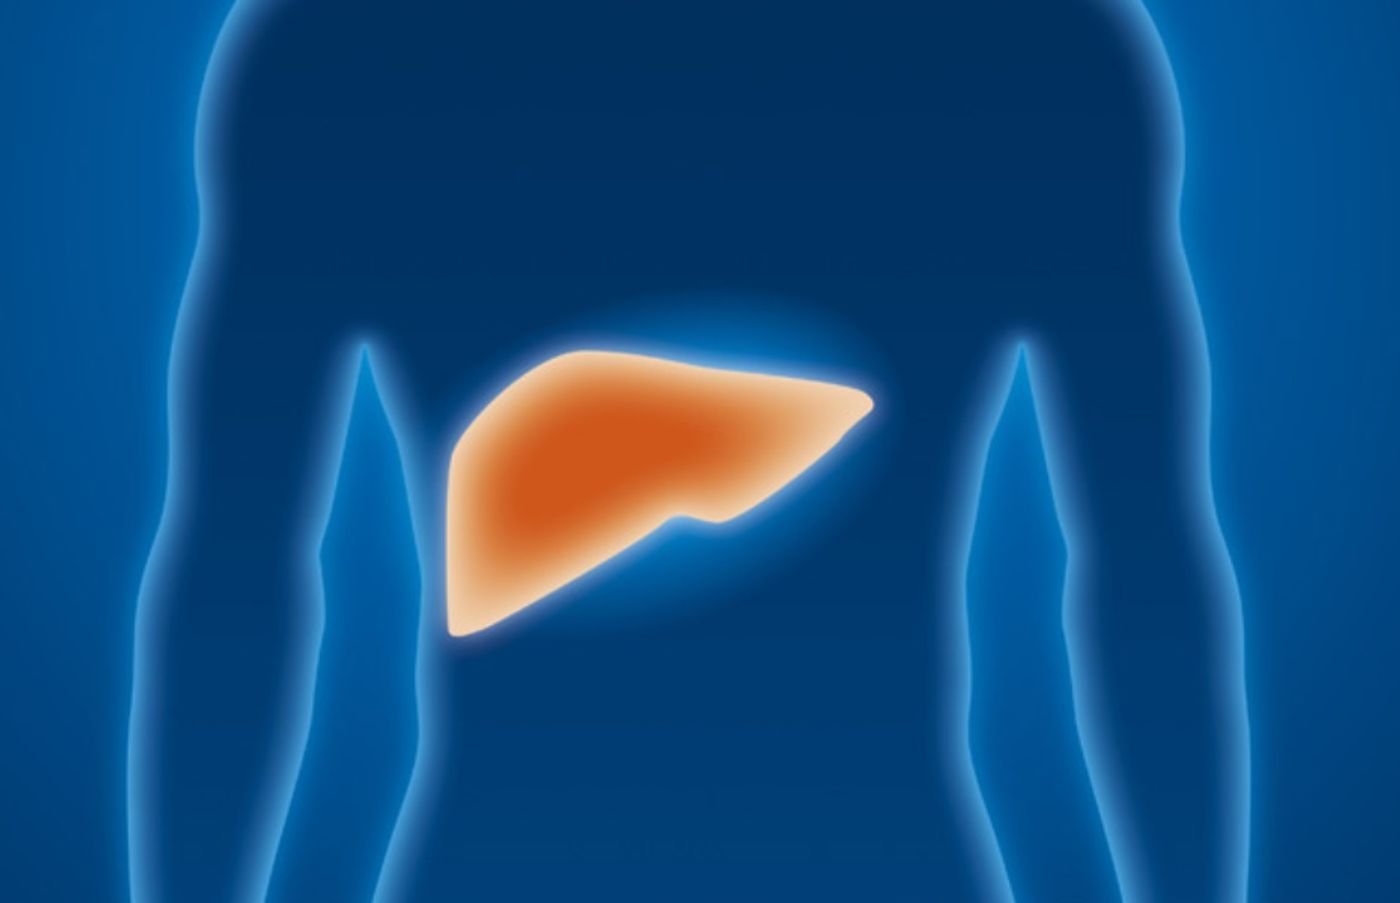 Hepatitis C is a contagious liver disease caused by a virus that ranges in severity from a mild illness lasting a few weeks to a serious, lifelong illness that attacks the liver. Source: Tech Times